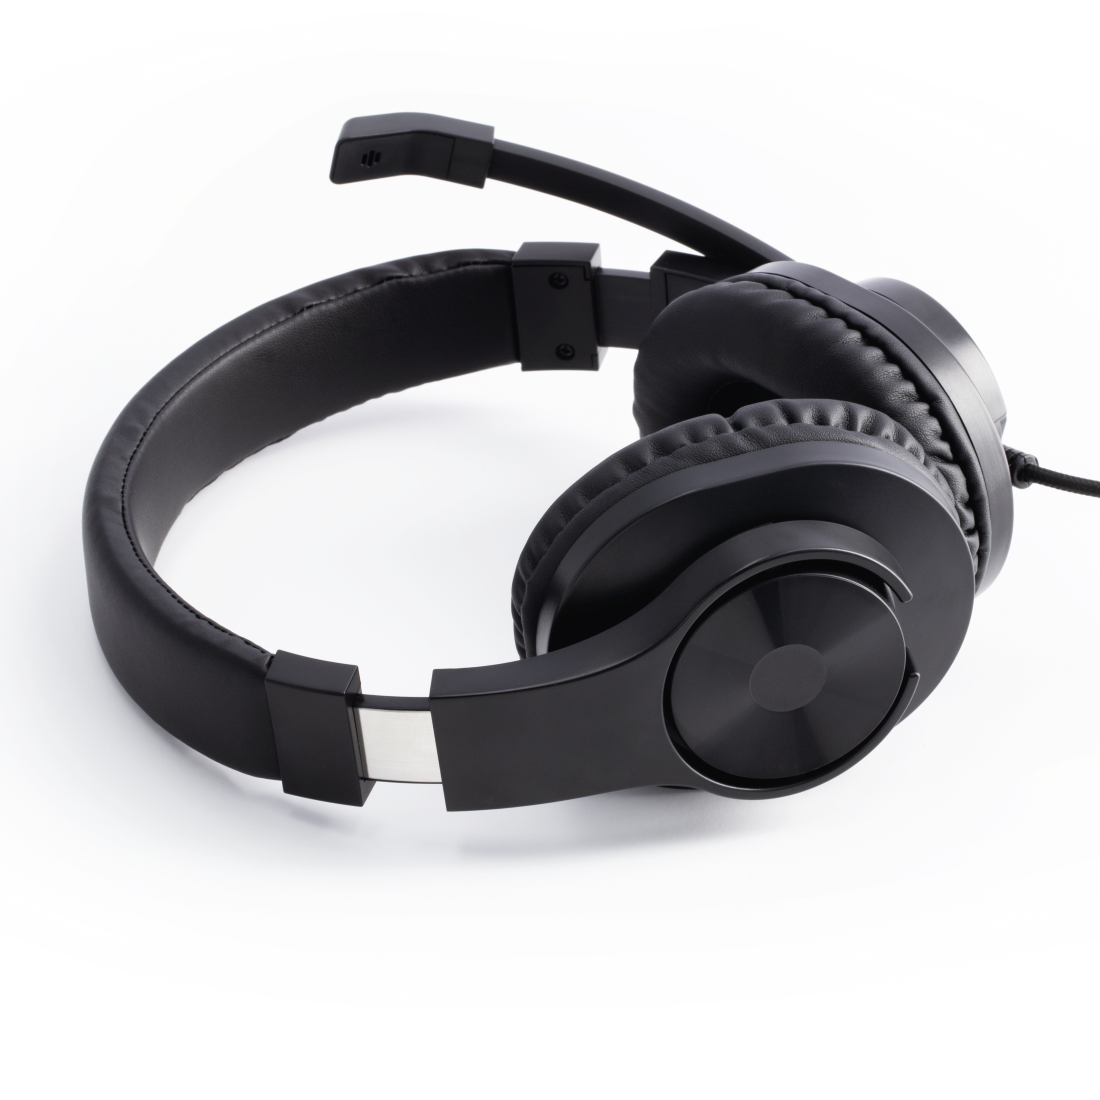 Hama HS-P350 Over-Ear PC Office Stereo Headset - Black | 419705 from Hama - DID Electrical